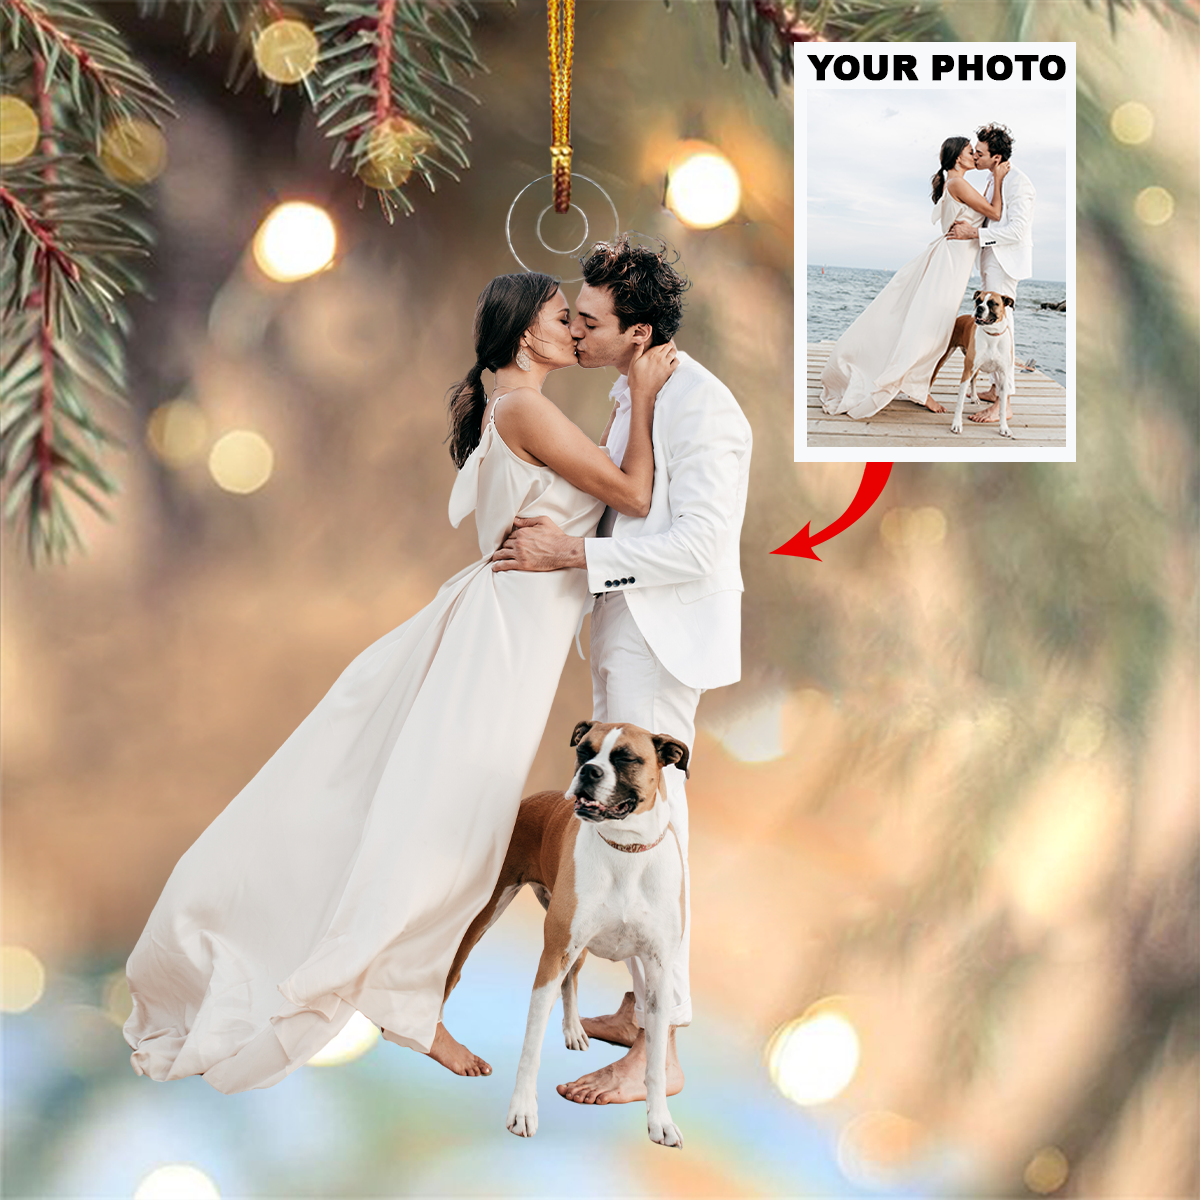 Customized Your Photo Ornament V36 - Personalized Photo Mica Ornament - Christmas Gift For Couple, Wife, Husband